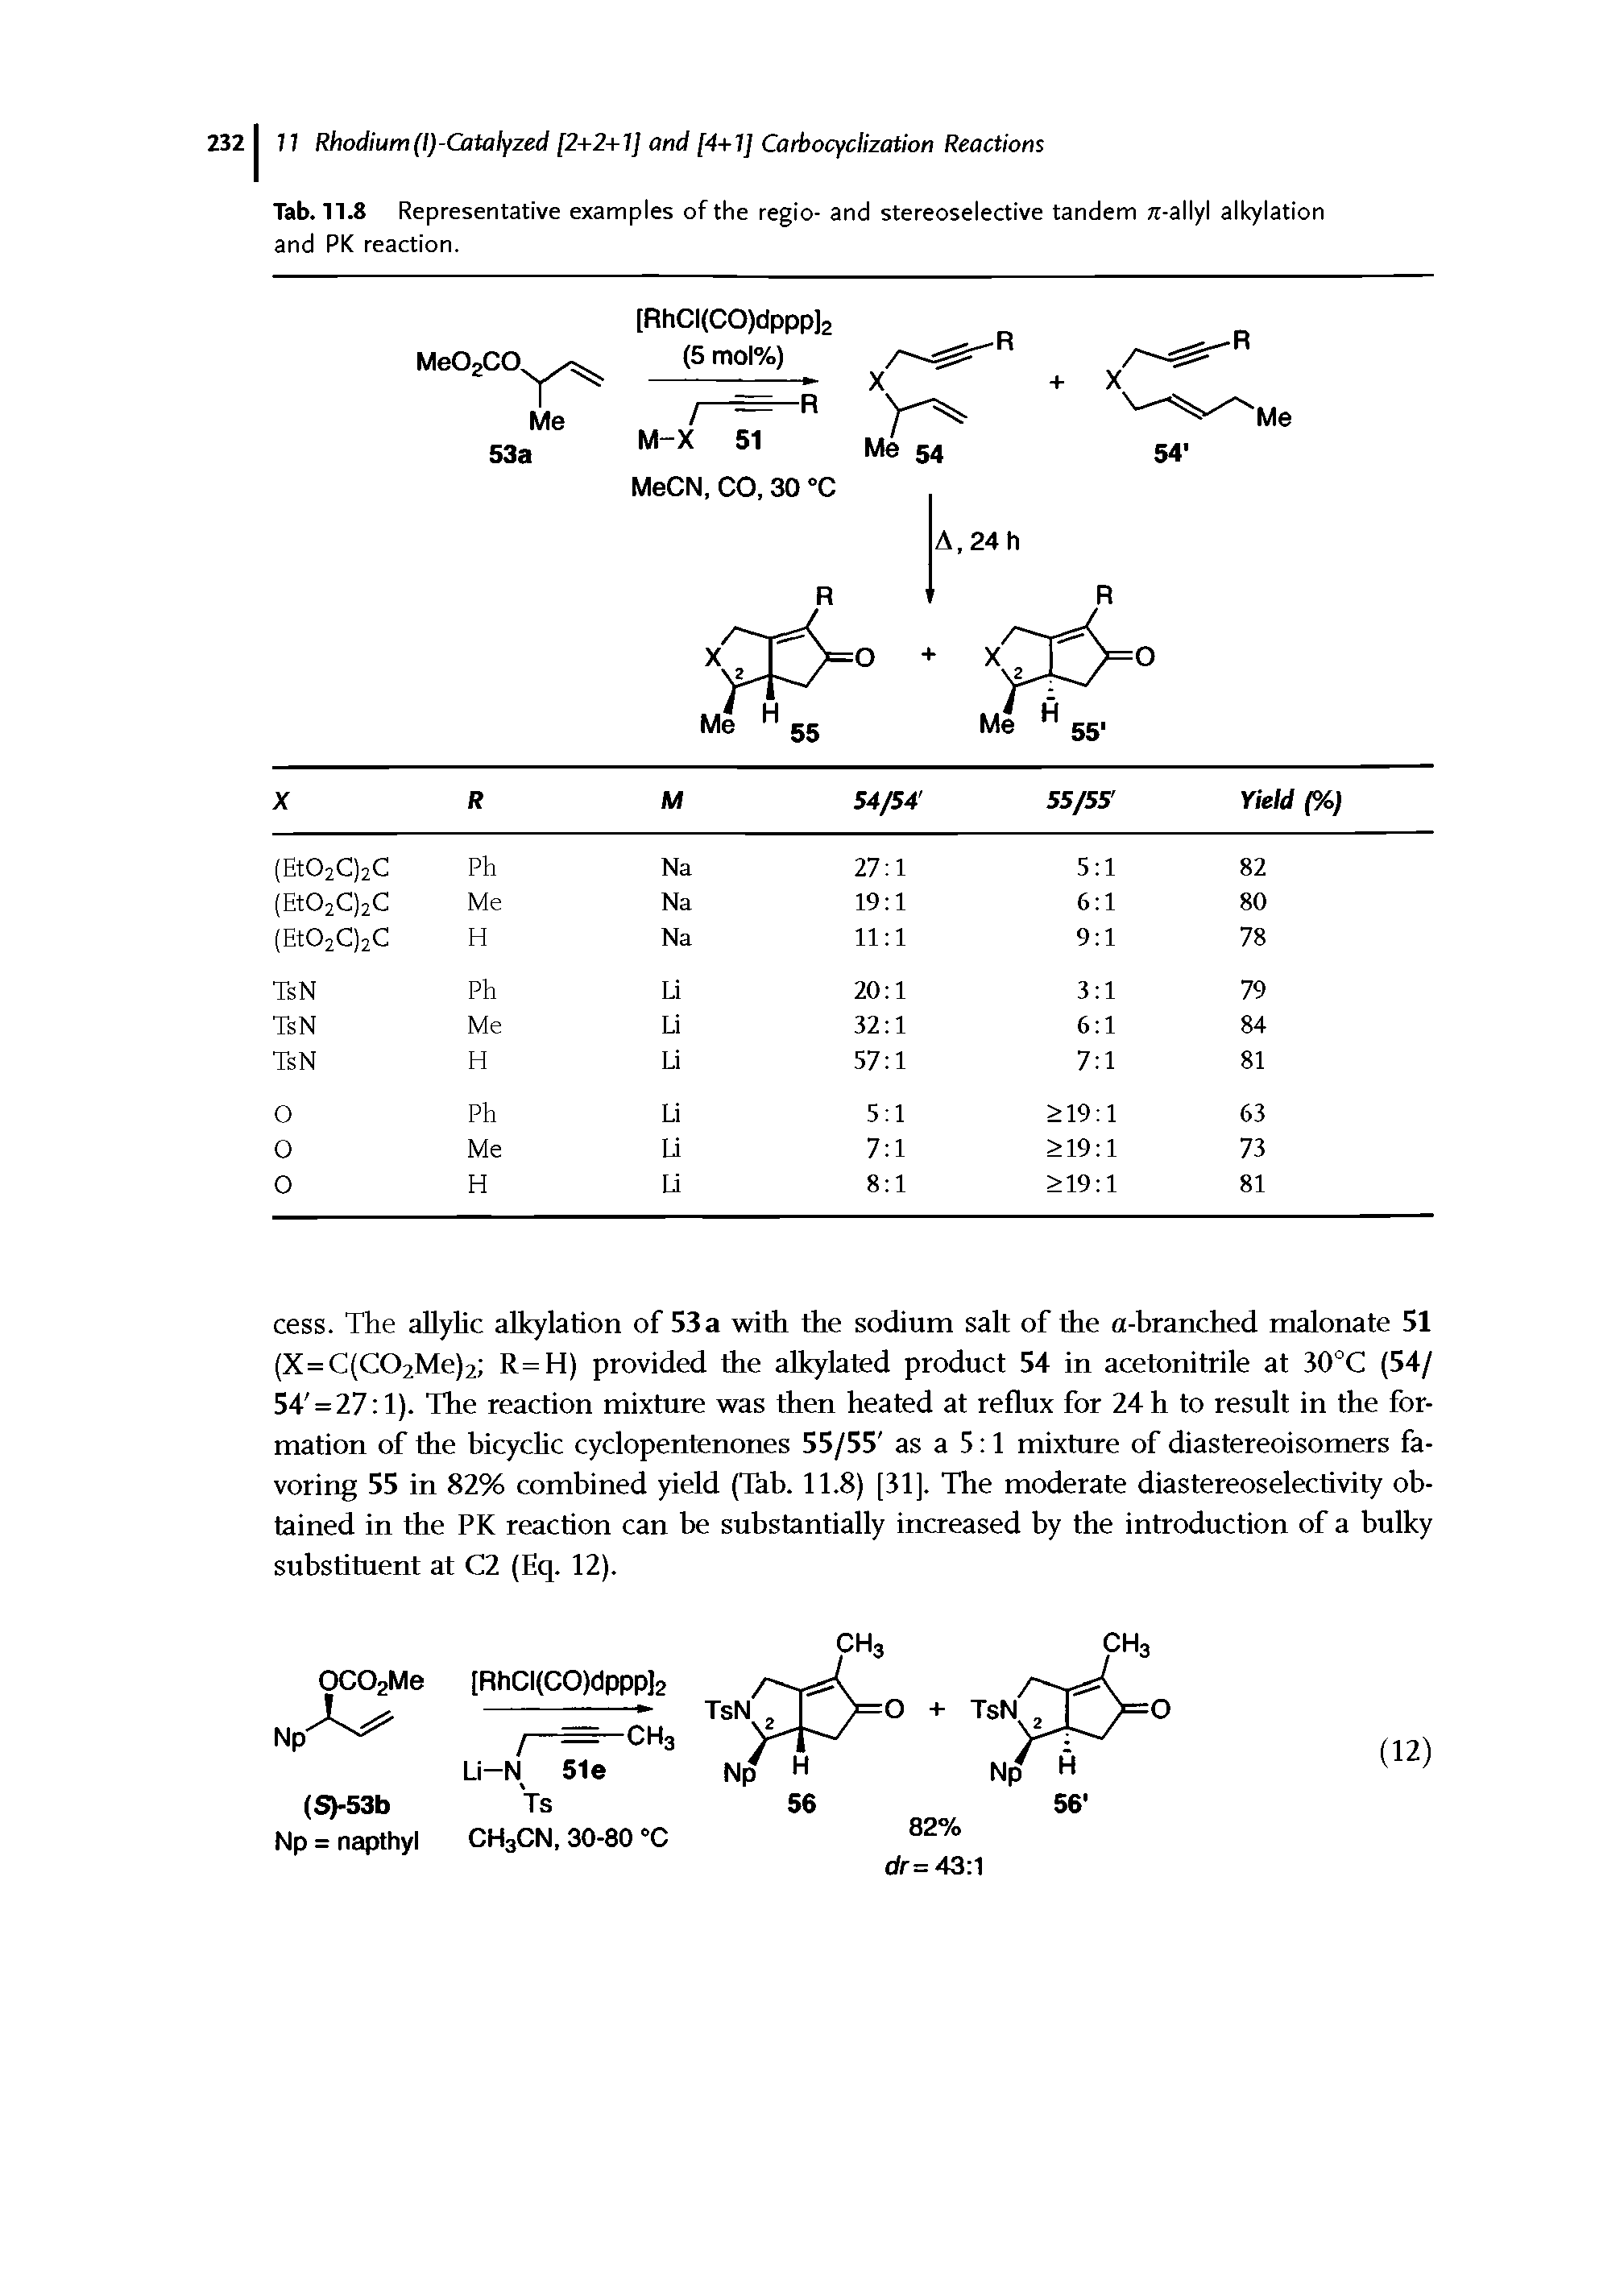 Tab. 11.8 Representative examples of the regio- and stereoselective tandem n-allyl alkylation and PK reaction.